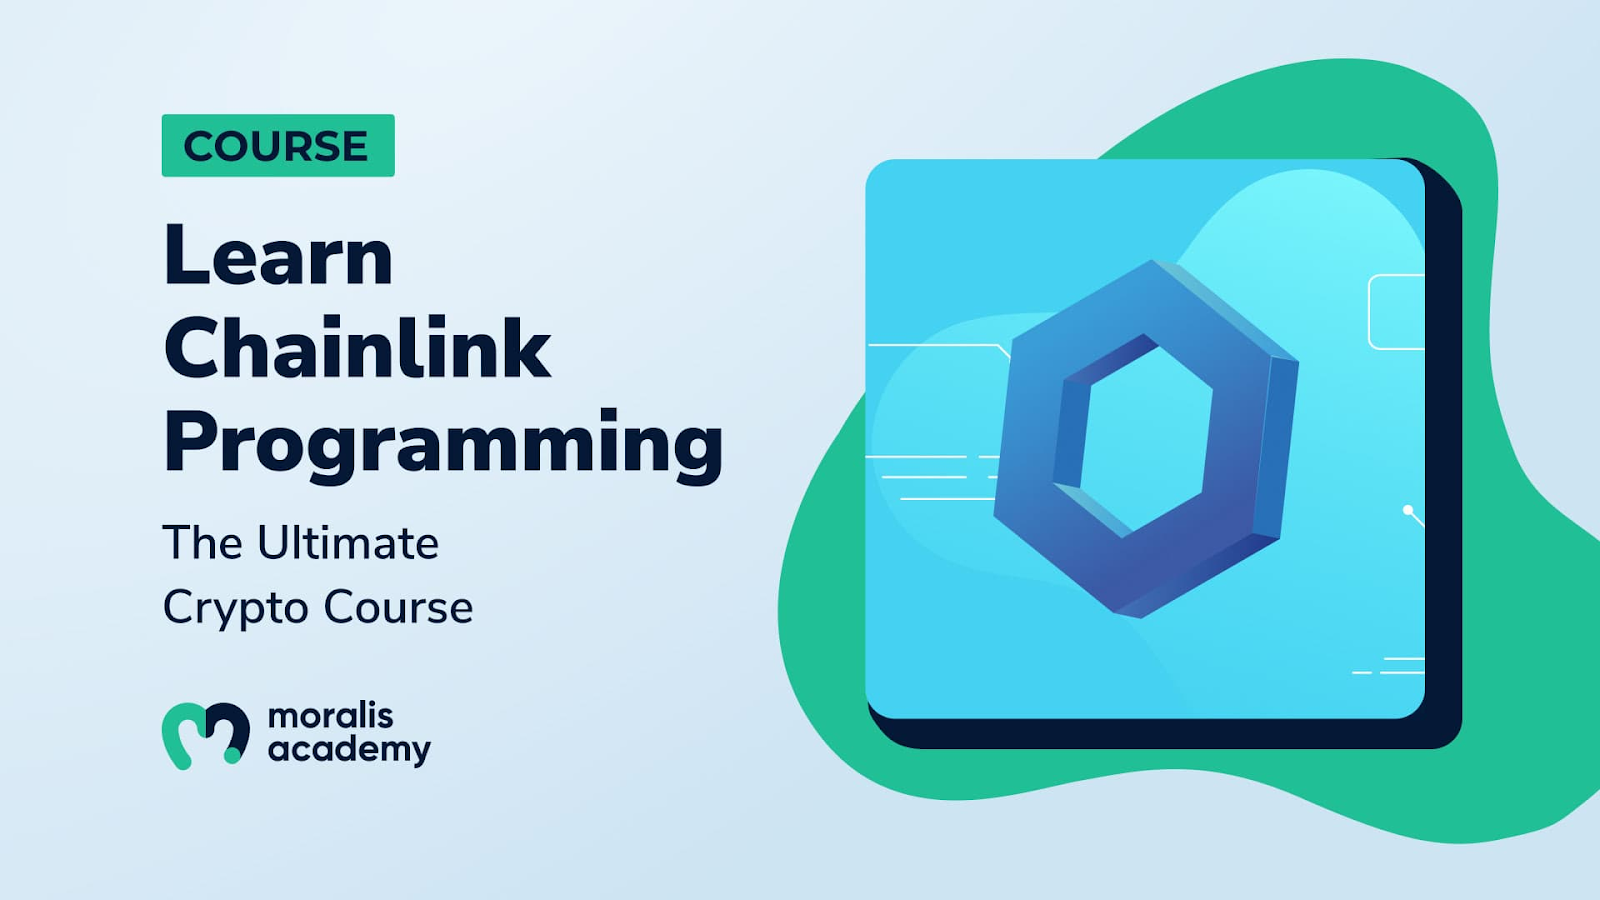 Apart from Chainlink, you can learn Chainlink programming at Moralis Academy.